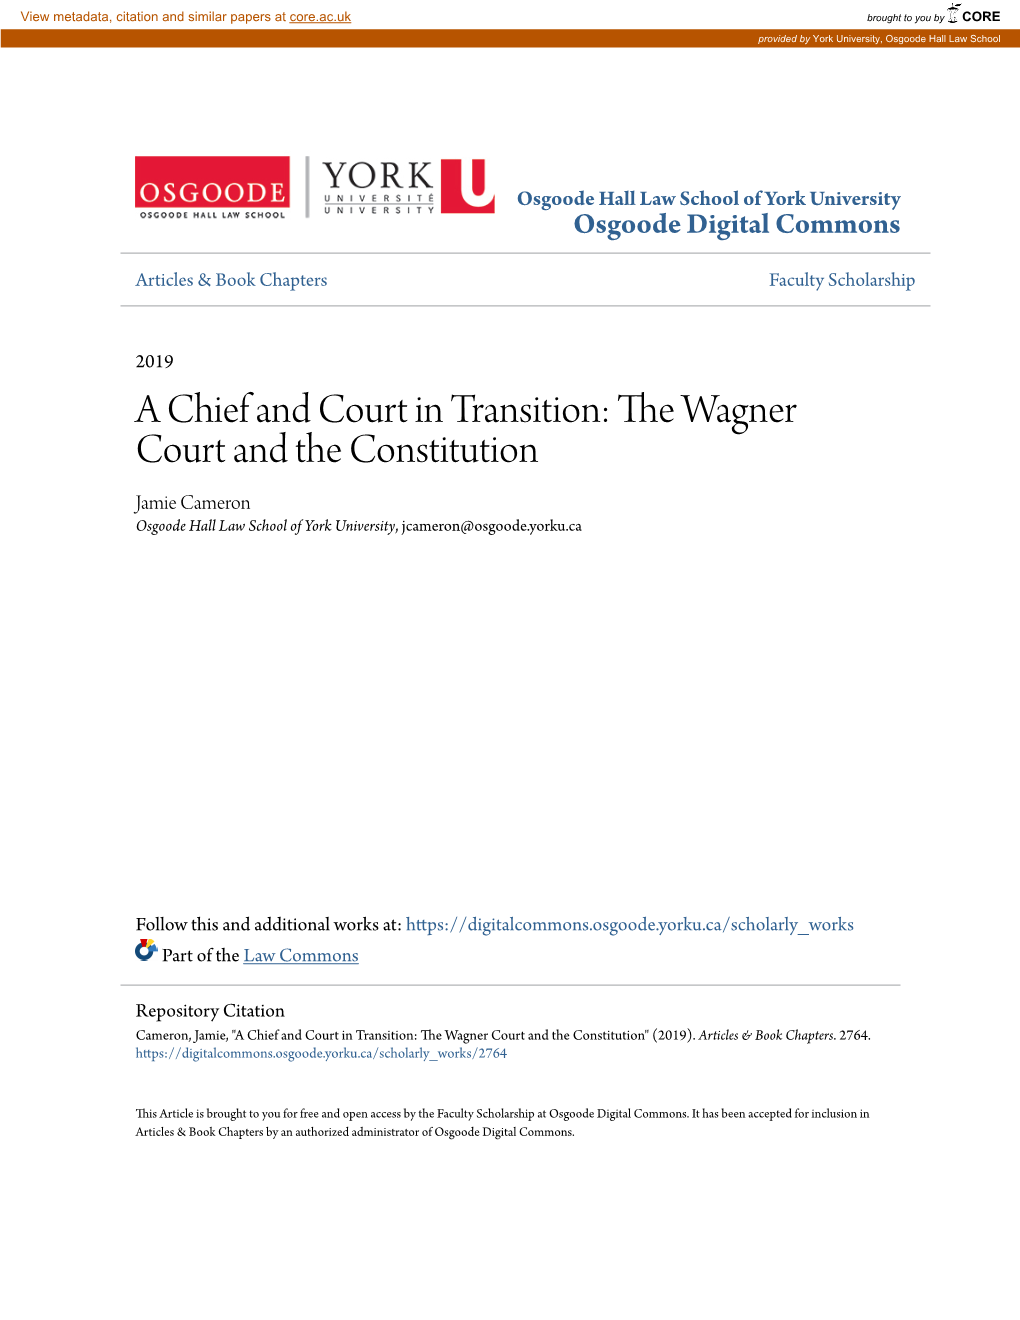 A Chief and Court in Transition: the Wagner Court and the Constitution Professor Jamie Cameron*